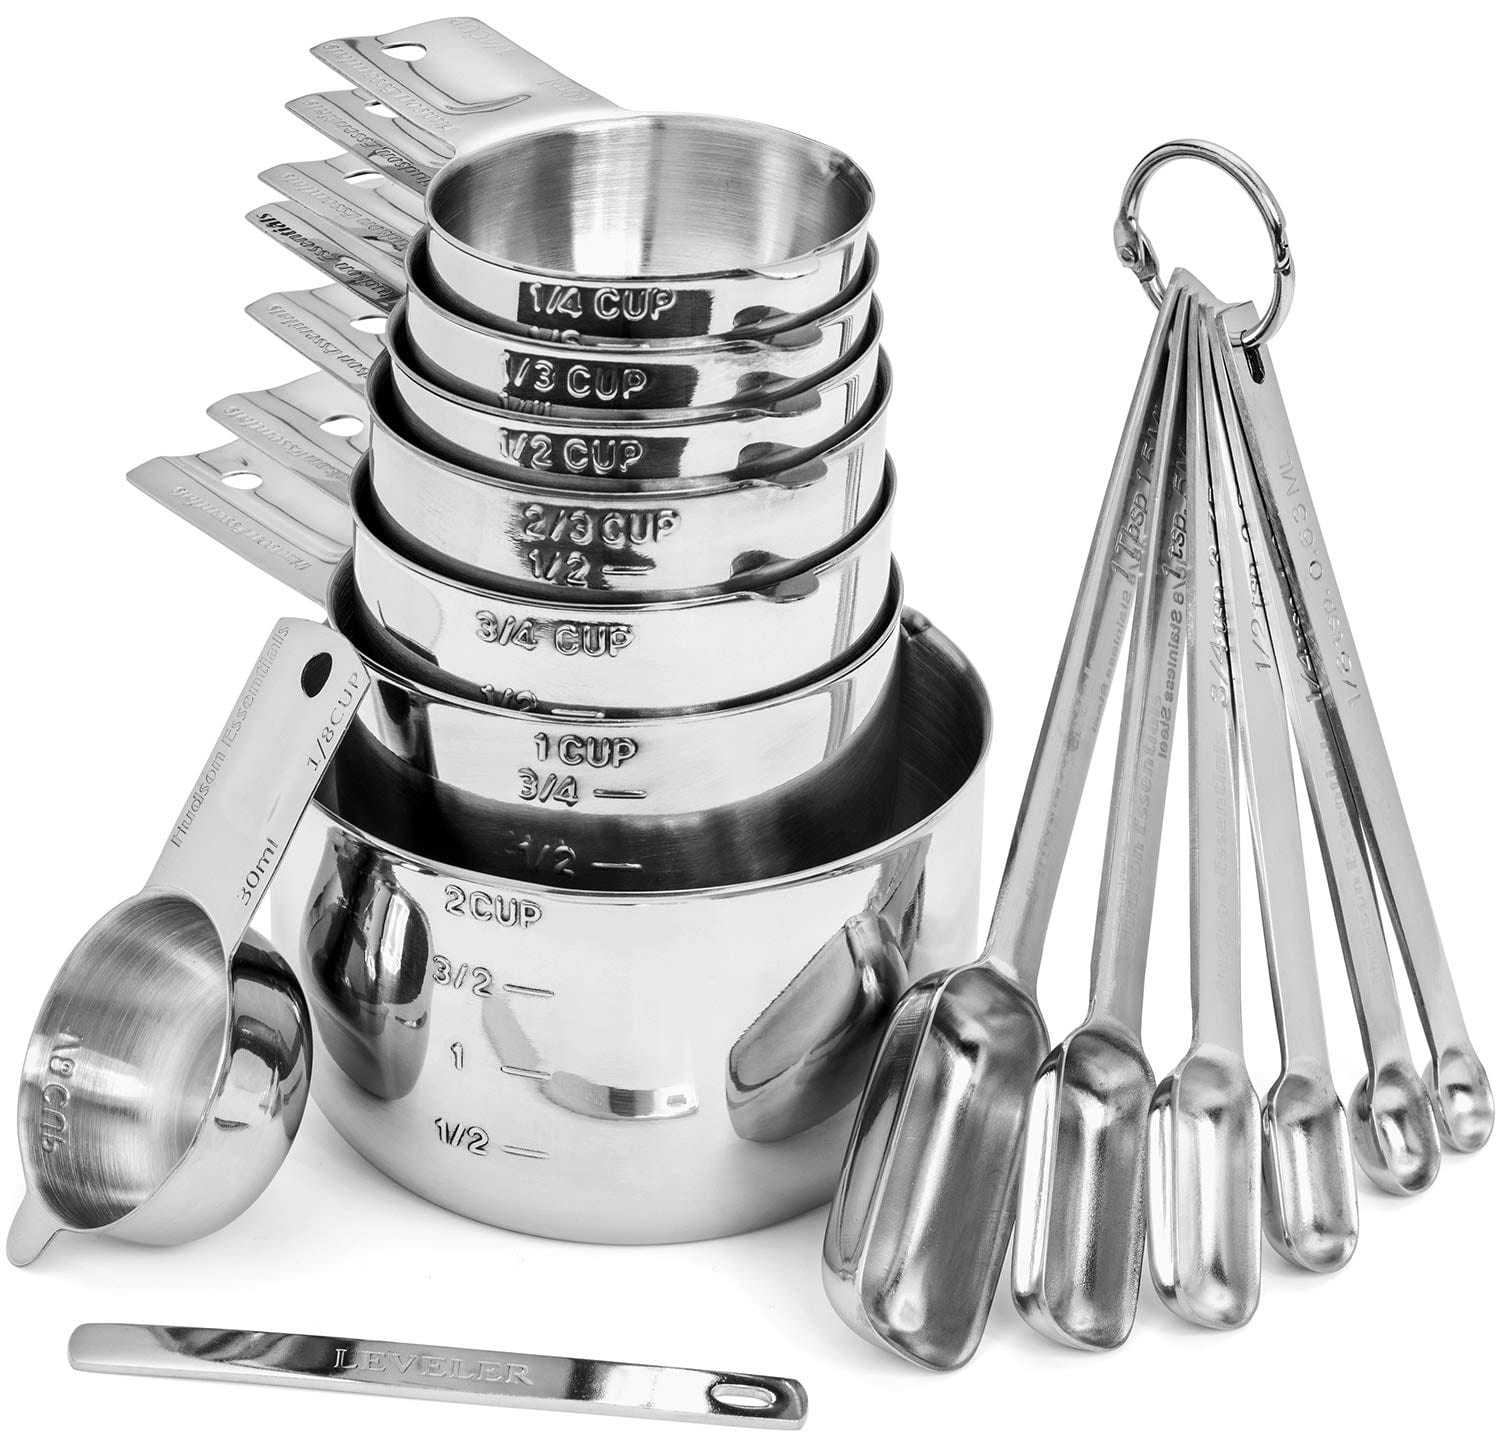 TQS Stainless Steel Measuring Cup and Spoons - Set of 20, 20 Pcs